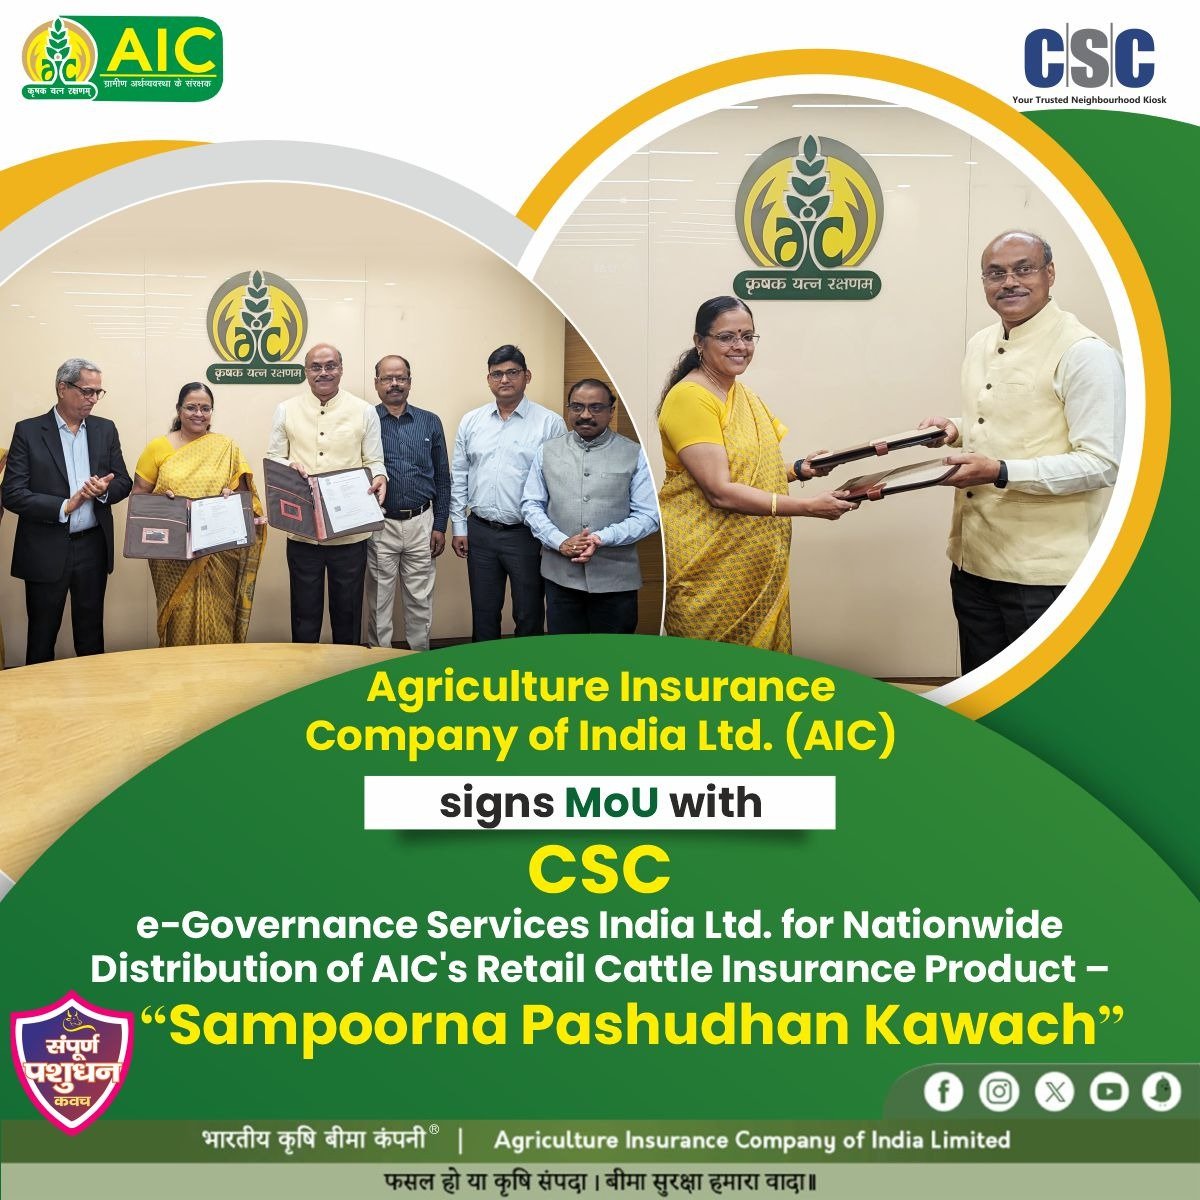 AIC and CSC e-Governance have partnered to offer 'Agriculture Insurance Solutions' in rural India. CSC's VLEs will help farmers enroll in AIC's 'Samagra Pashudhan Kavach,' covering livestock like milking cows, buffaloes, calves, and heifers.

#atmanirbharkisan #agriculture